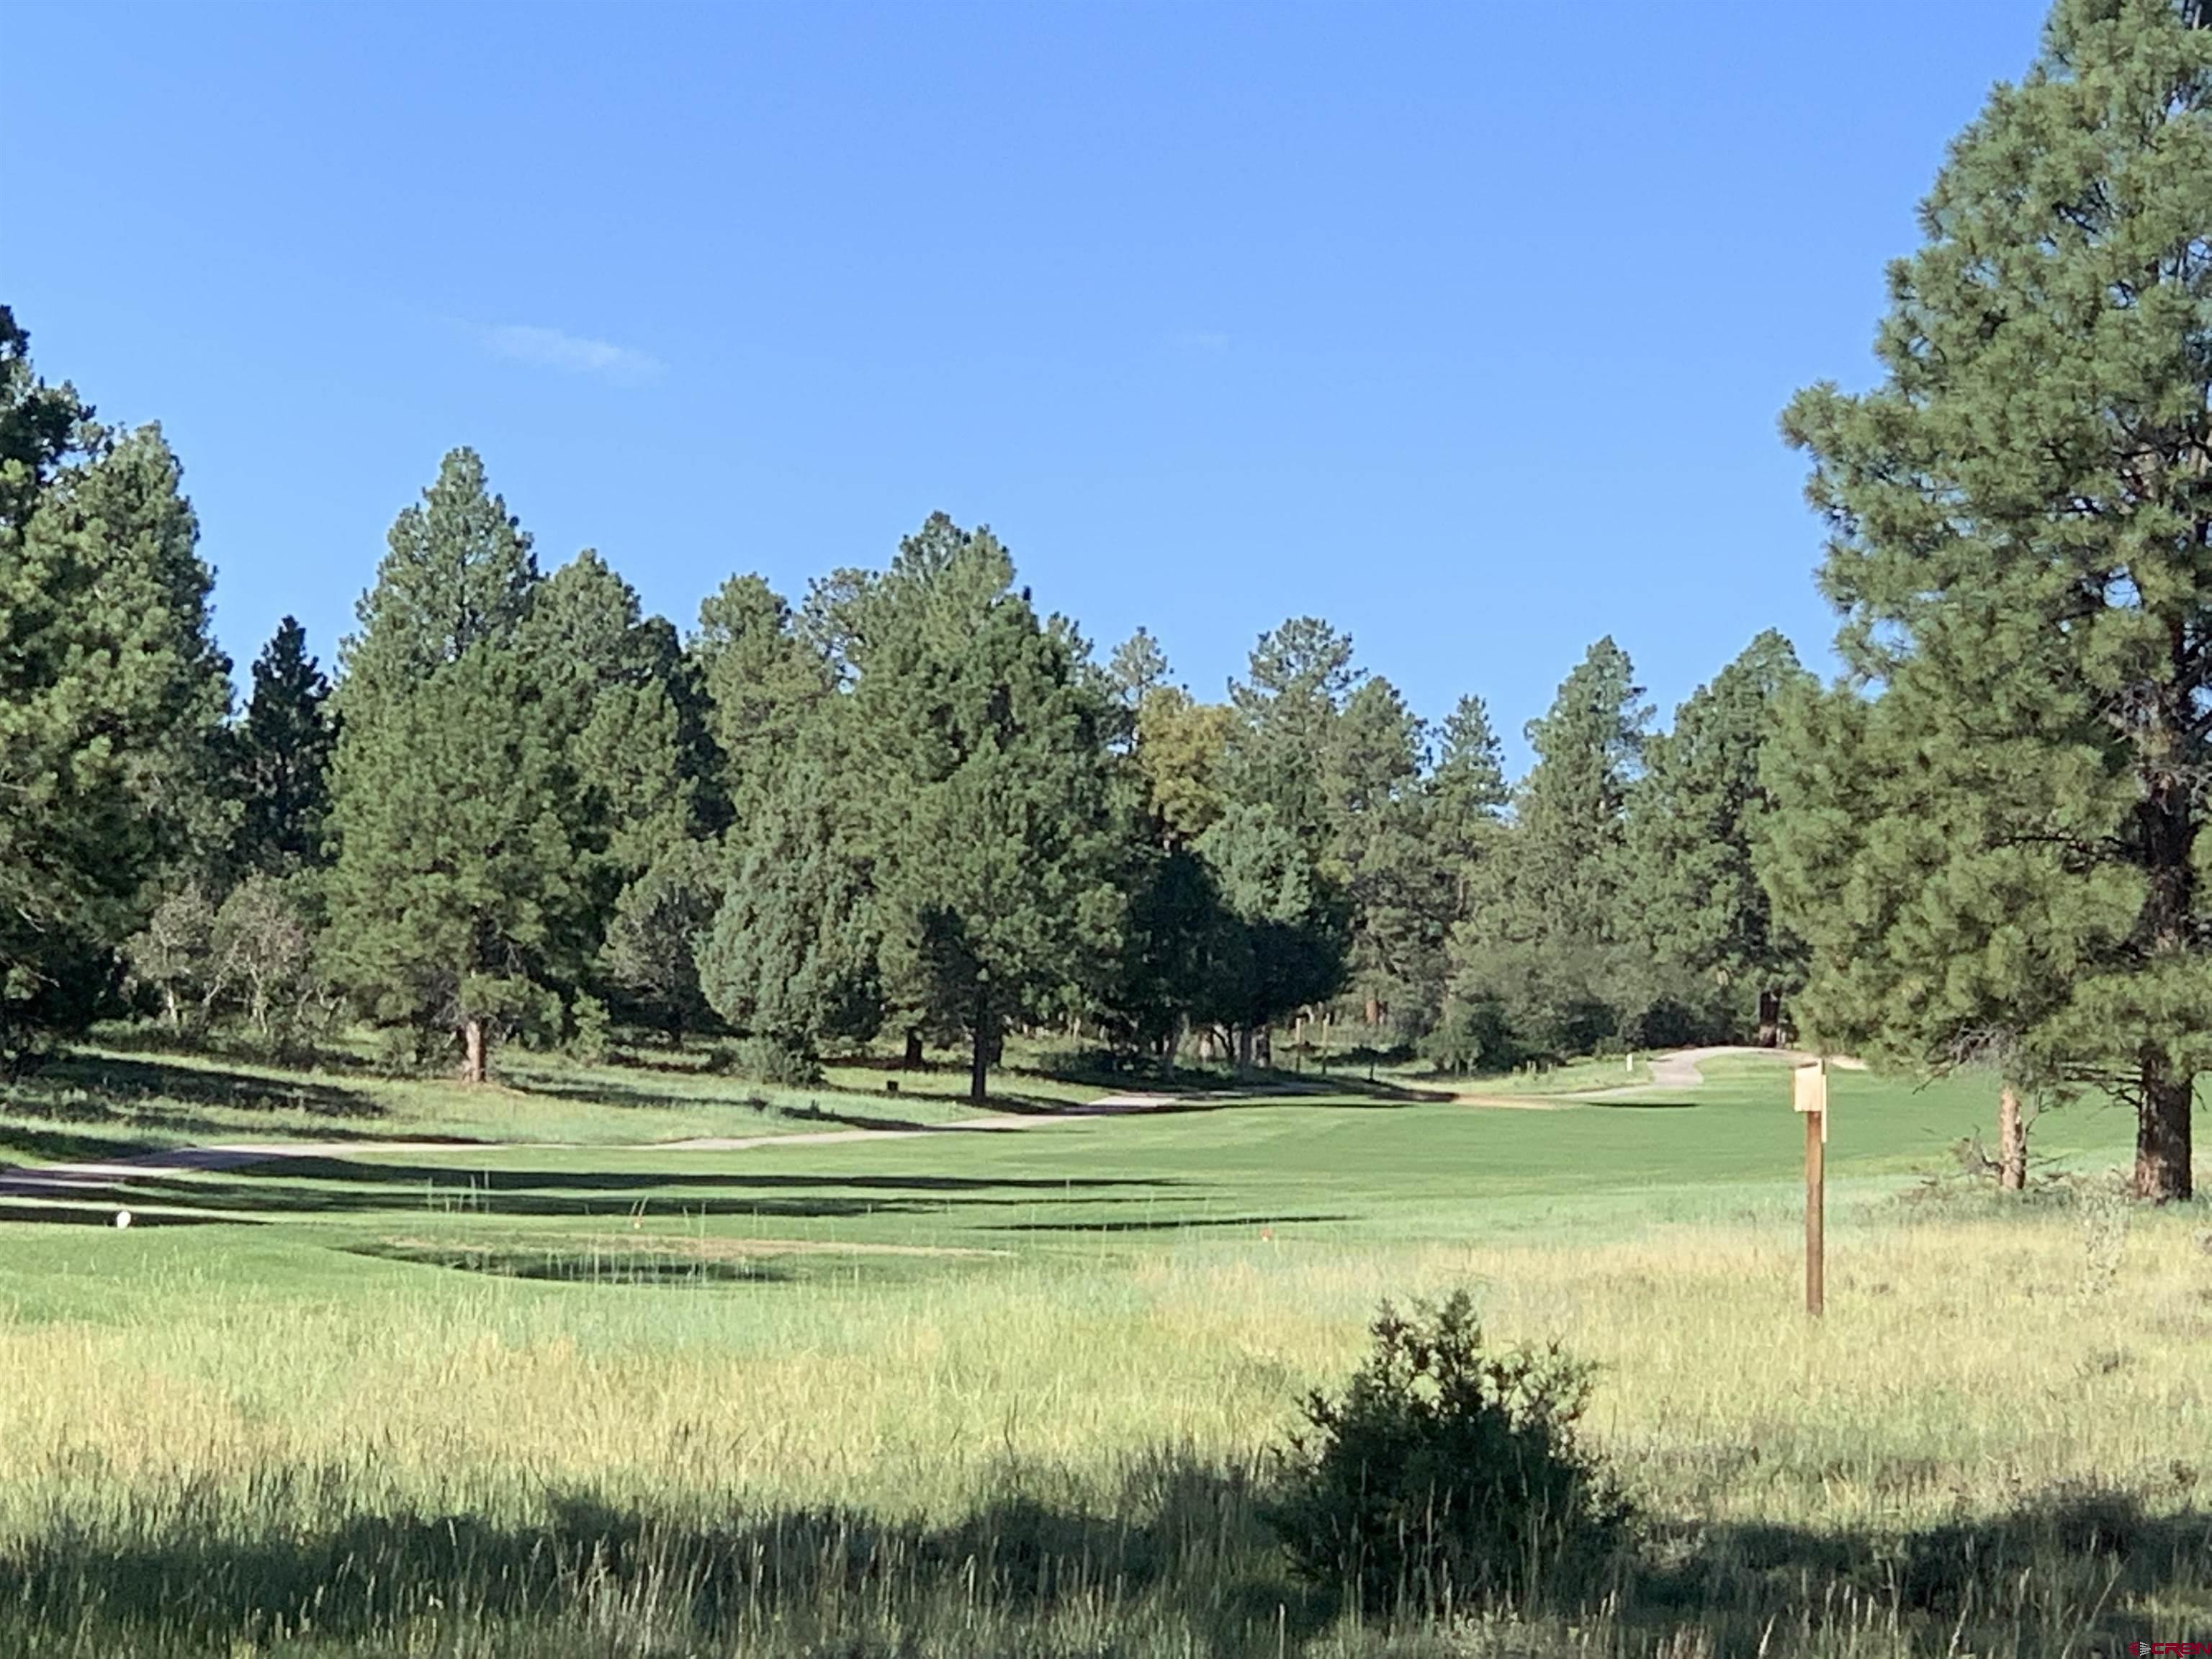 Located in the coveted Divide ranch golf club development on a quiet cul-de-sac location with easy access to CR 1 is this beautifully treed private lot with views of the 17 fairway. Ready to build with utilities to the lot line. The soils testing and septic design are complete and the reports are included. A $4000 savings. Enjoy golfing, biking, walking, x-country skiing and snowshoeing out your front door. Downtown Ridgway is 15 minutes away, world class skiing in Telluride is 45 minutes away, Ouray and the hot springs and jeeping trails are 30 minutes away, Montrose and its shopping and Regional airport is 30 minutes away. Divide Ranch & Club is a hidden gem nestled in the San Juan’s. There is also a divide ranch golf membership included with a transfer fee of $3000 to be paid by the buyer.